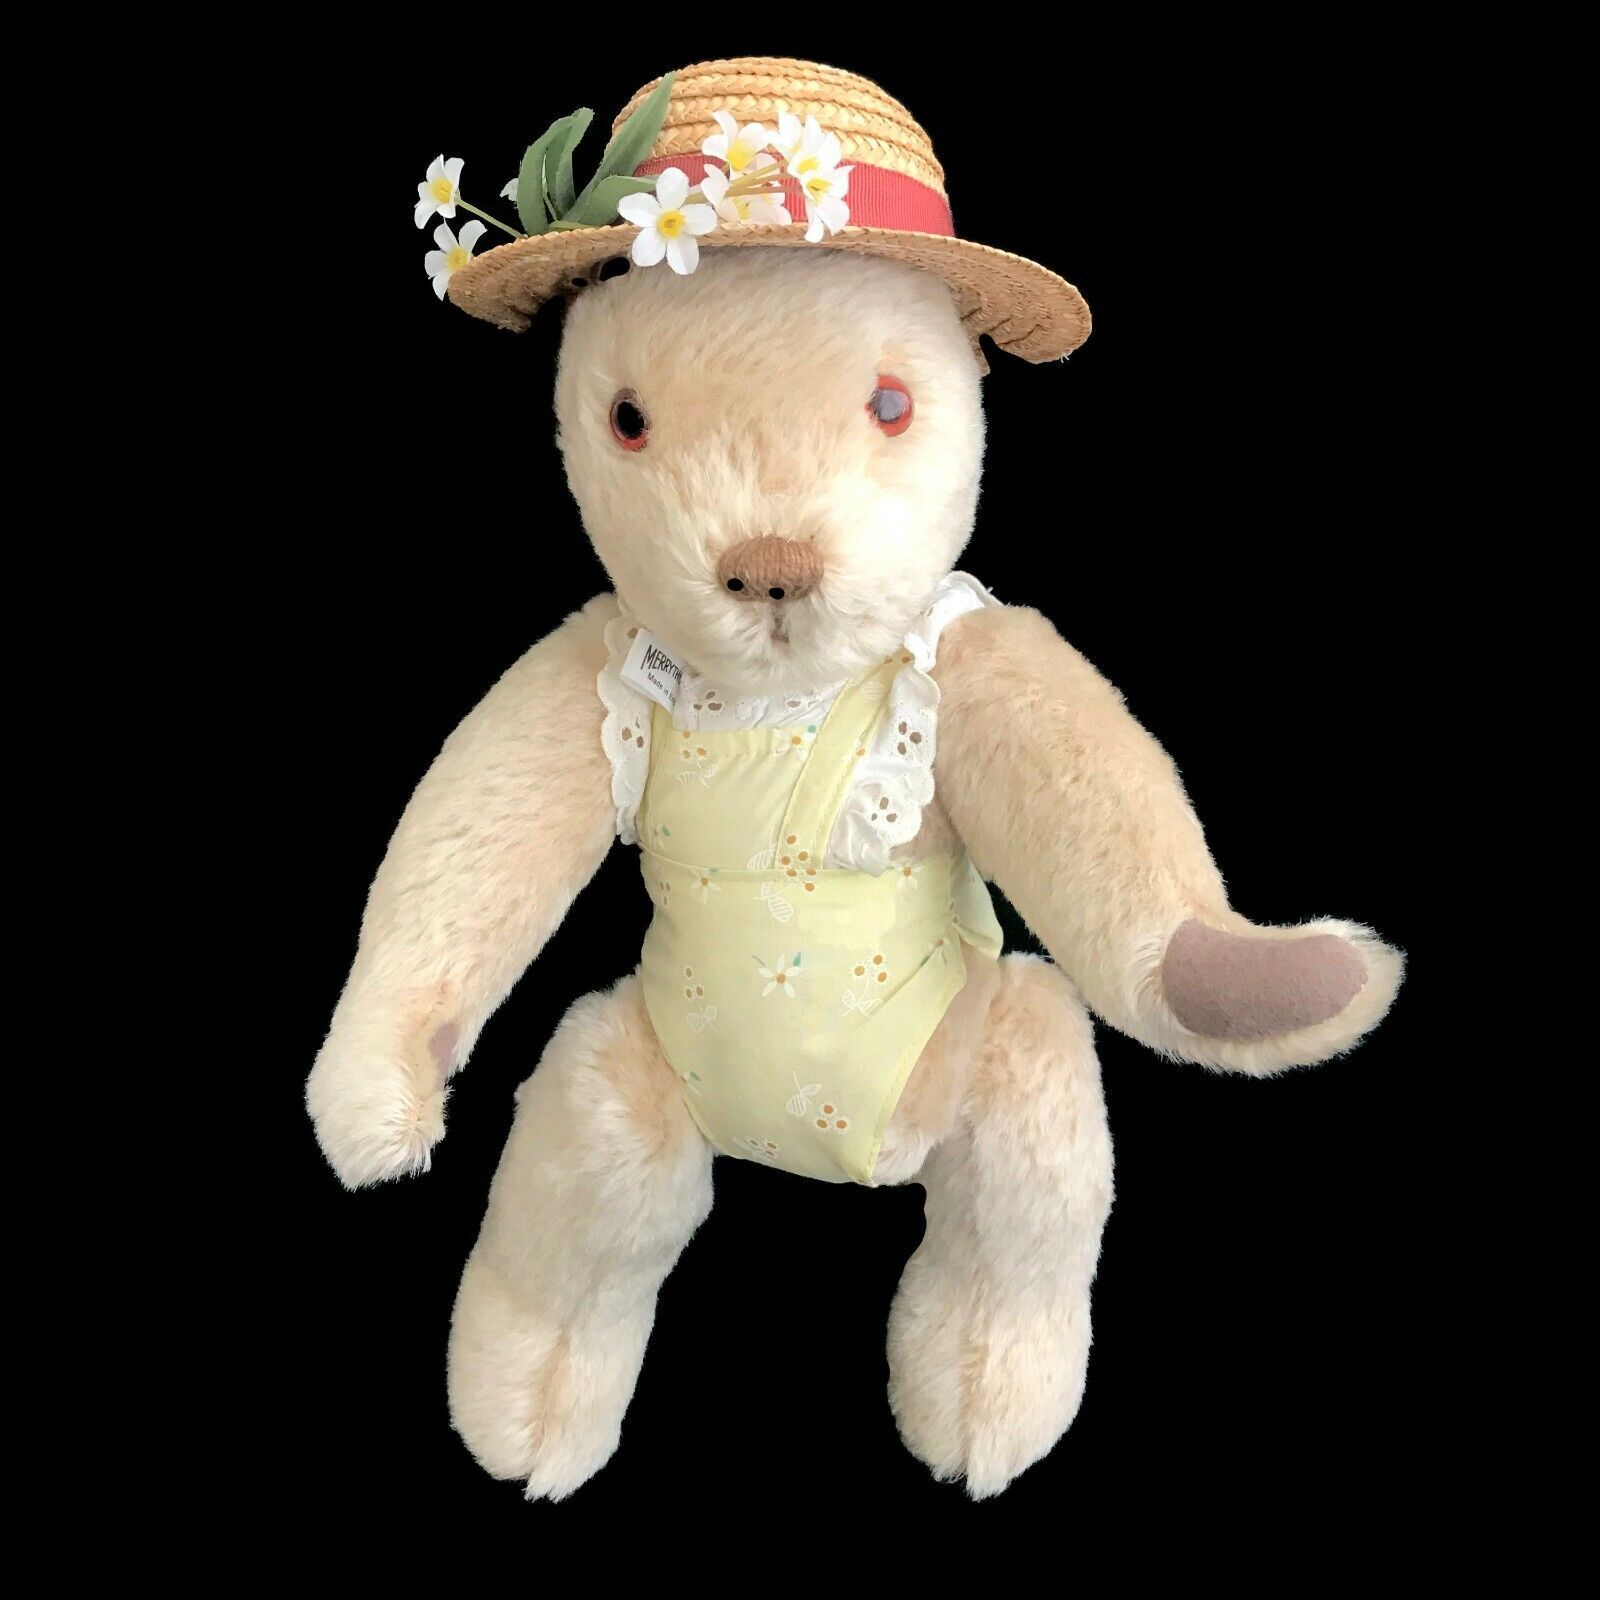 Primary image for Vintage Merrythought Articulated Teddy Bear Stumpy Legs Tagged Floral Romper 15"